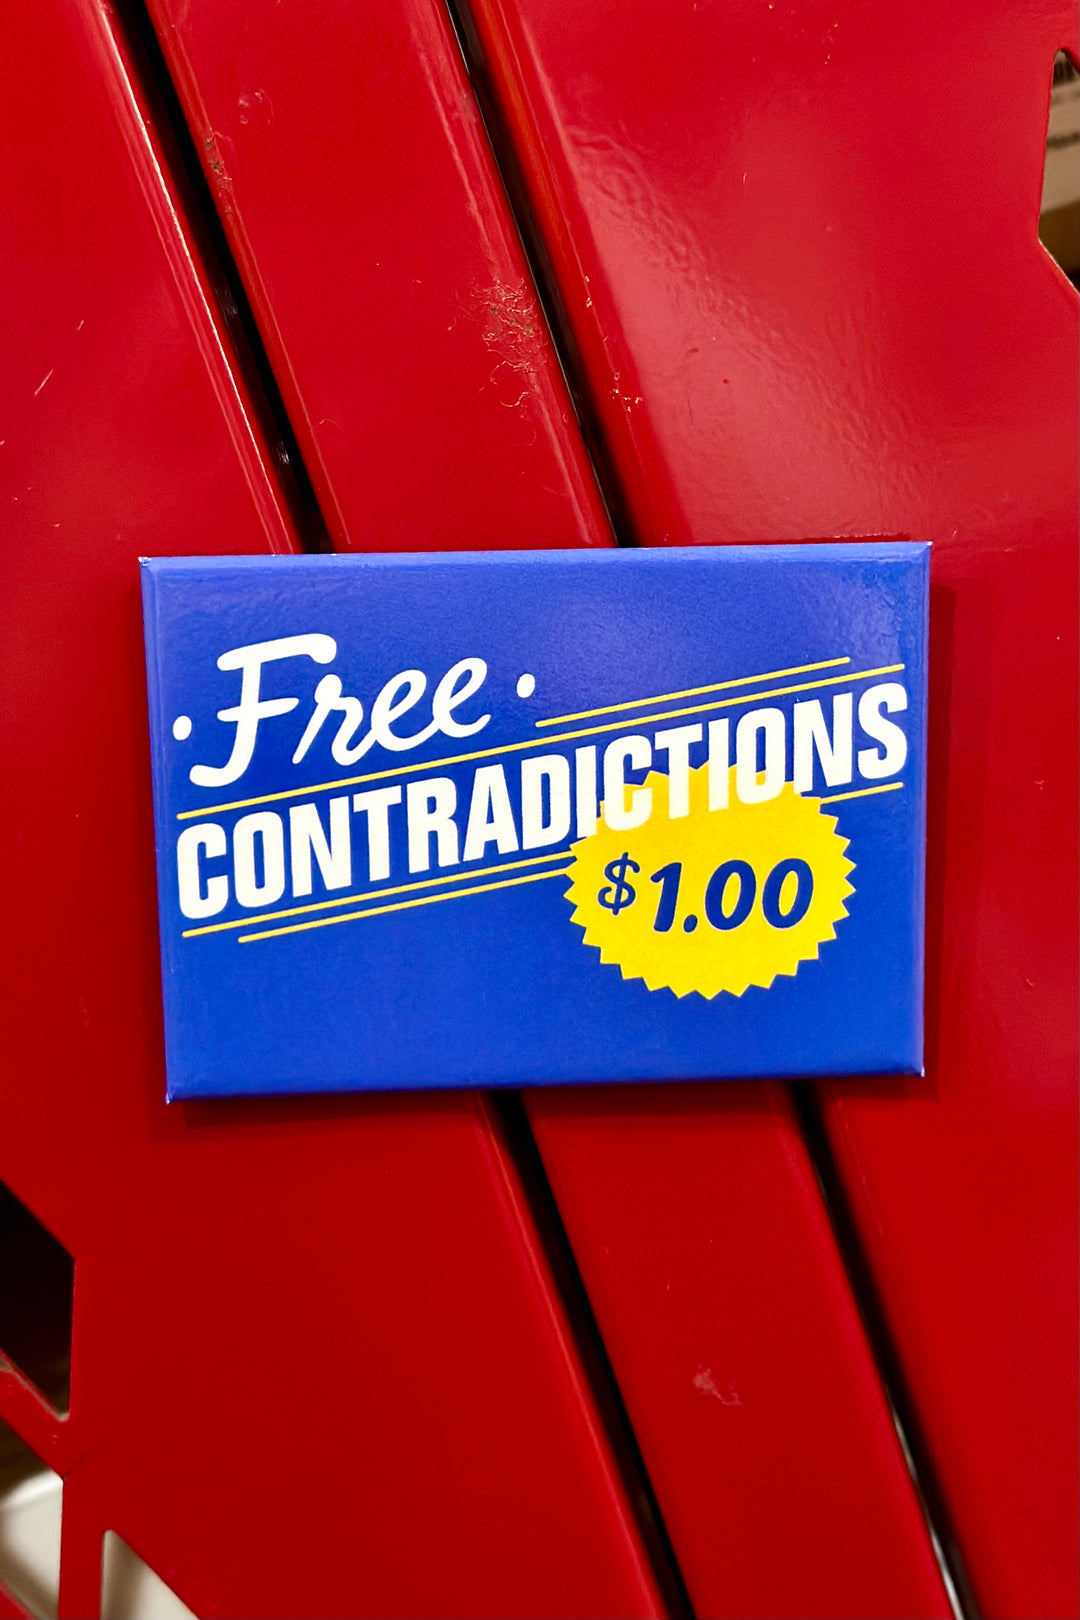 Free Contradictions Magnet